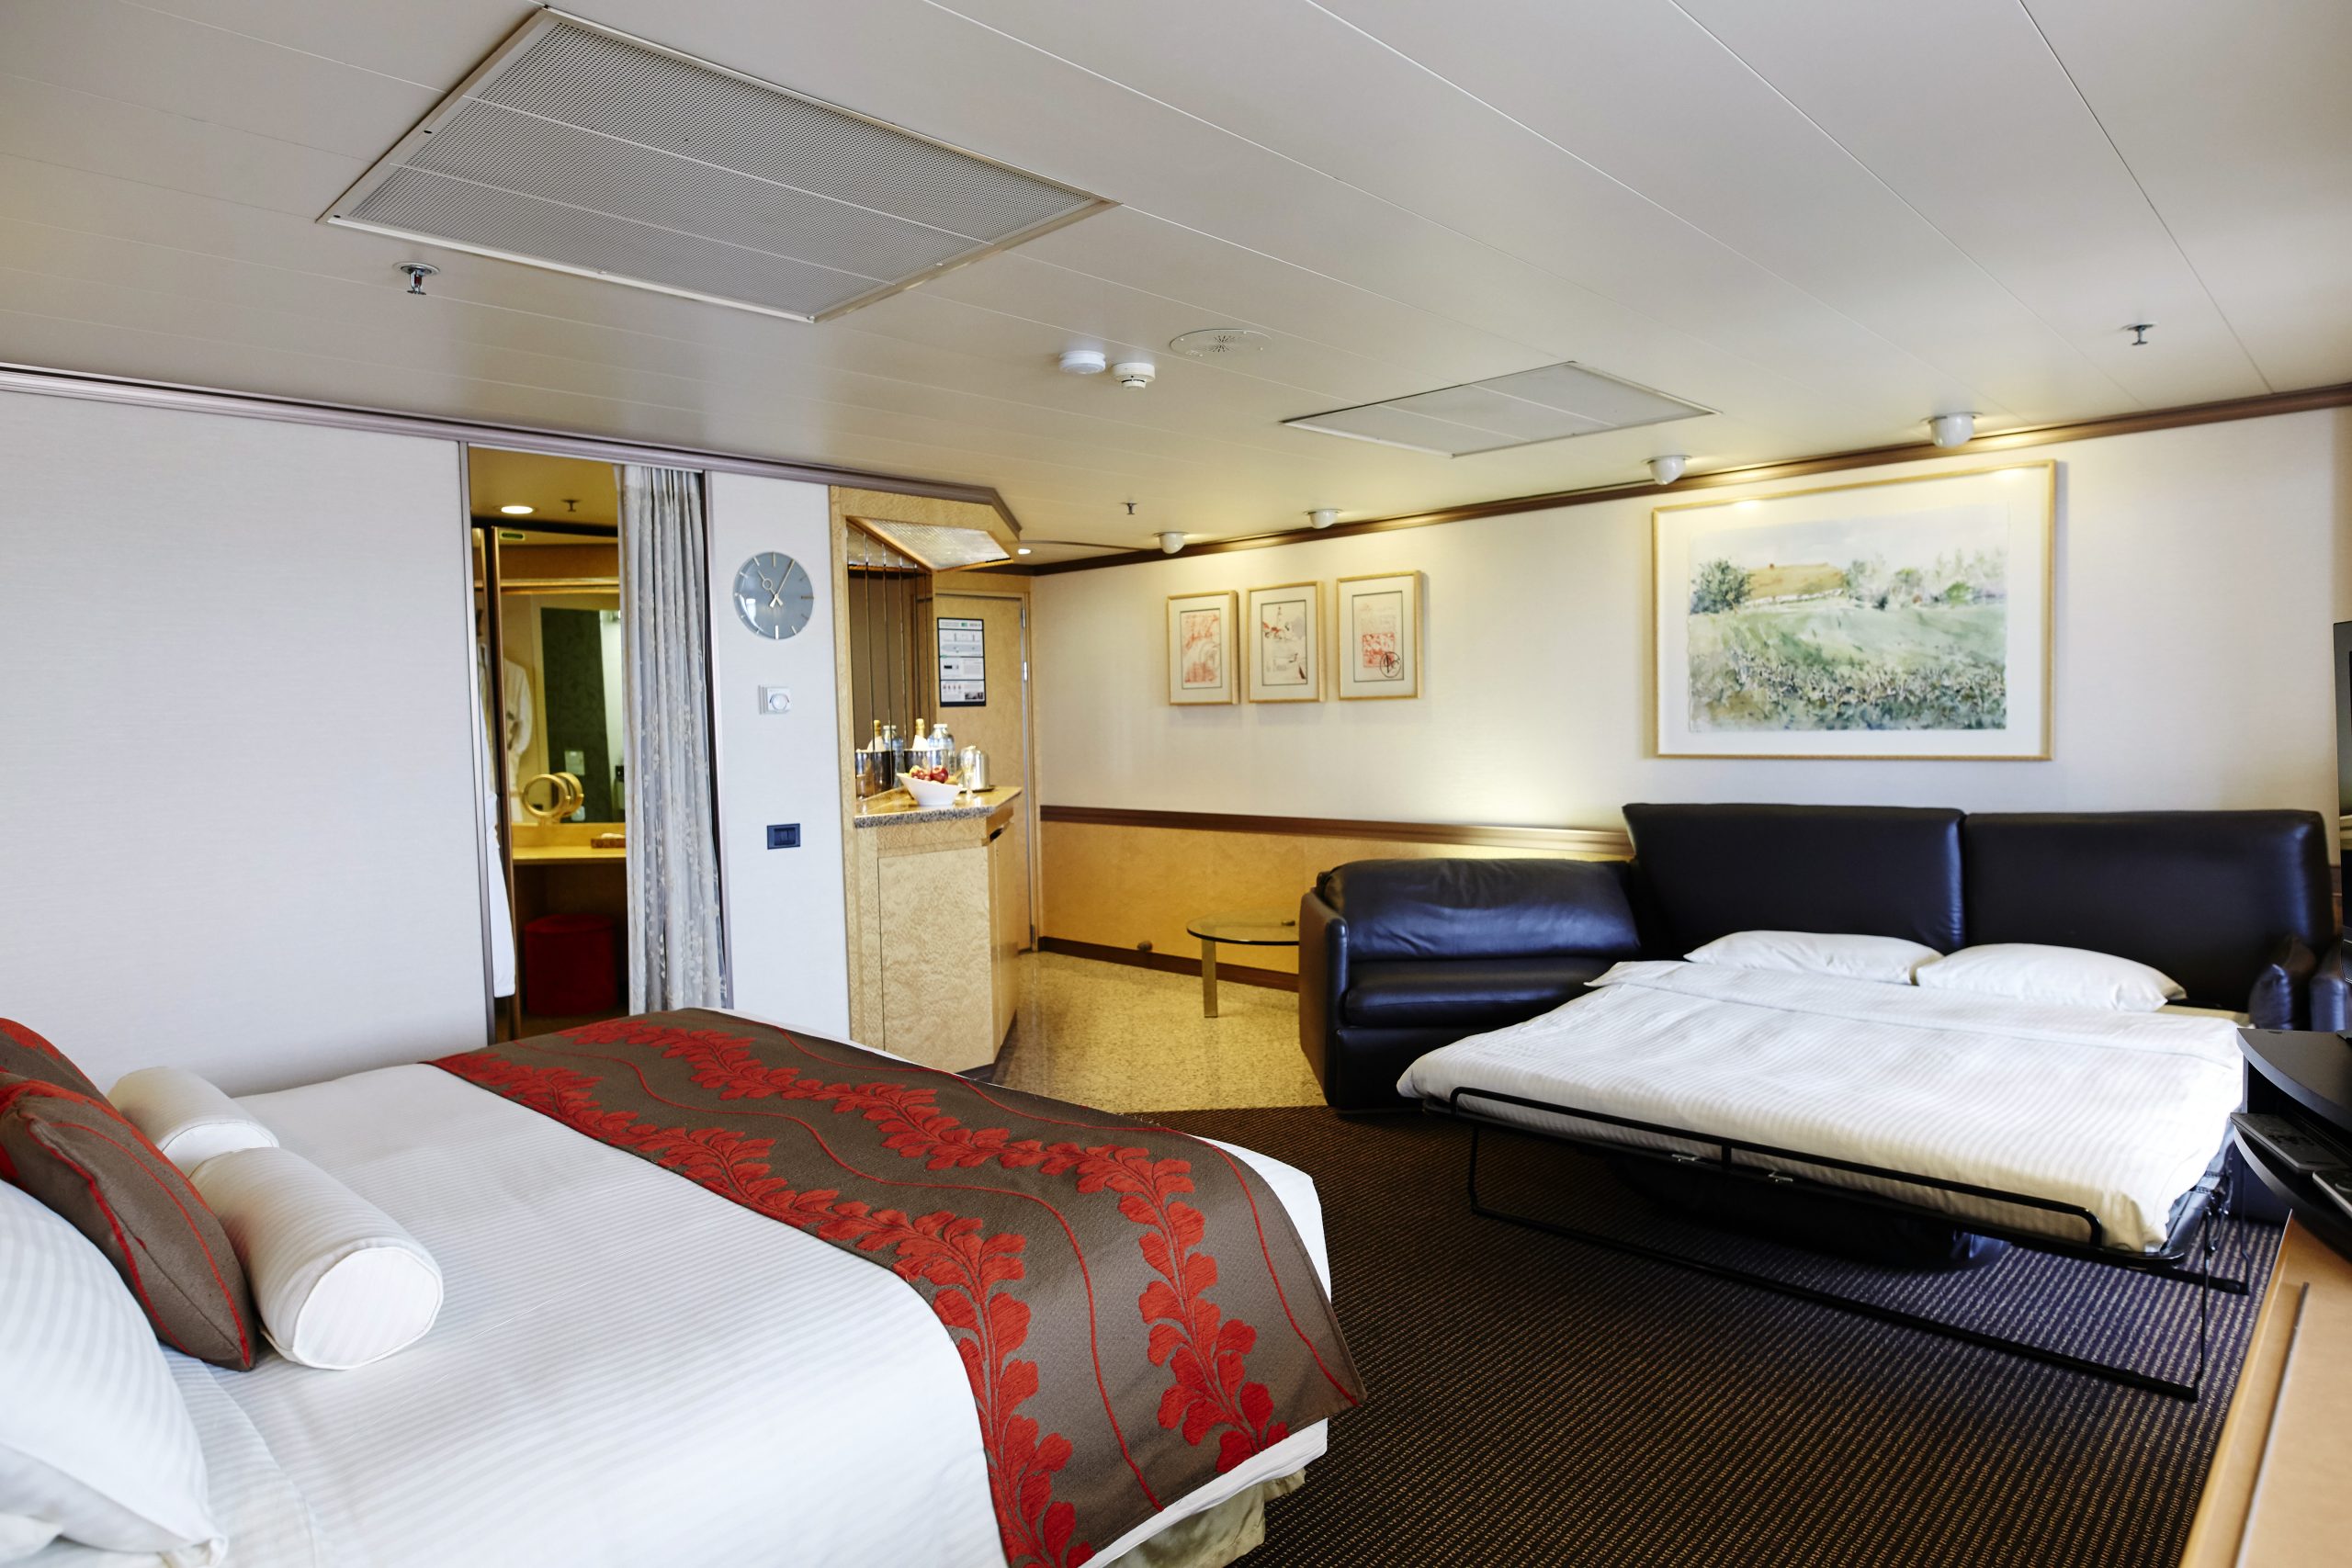 Journey_Ship_SG balcony deck _10 (double bed and double sofa bed)